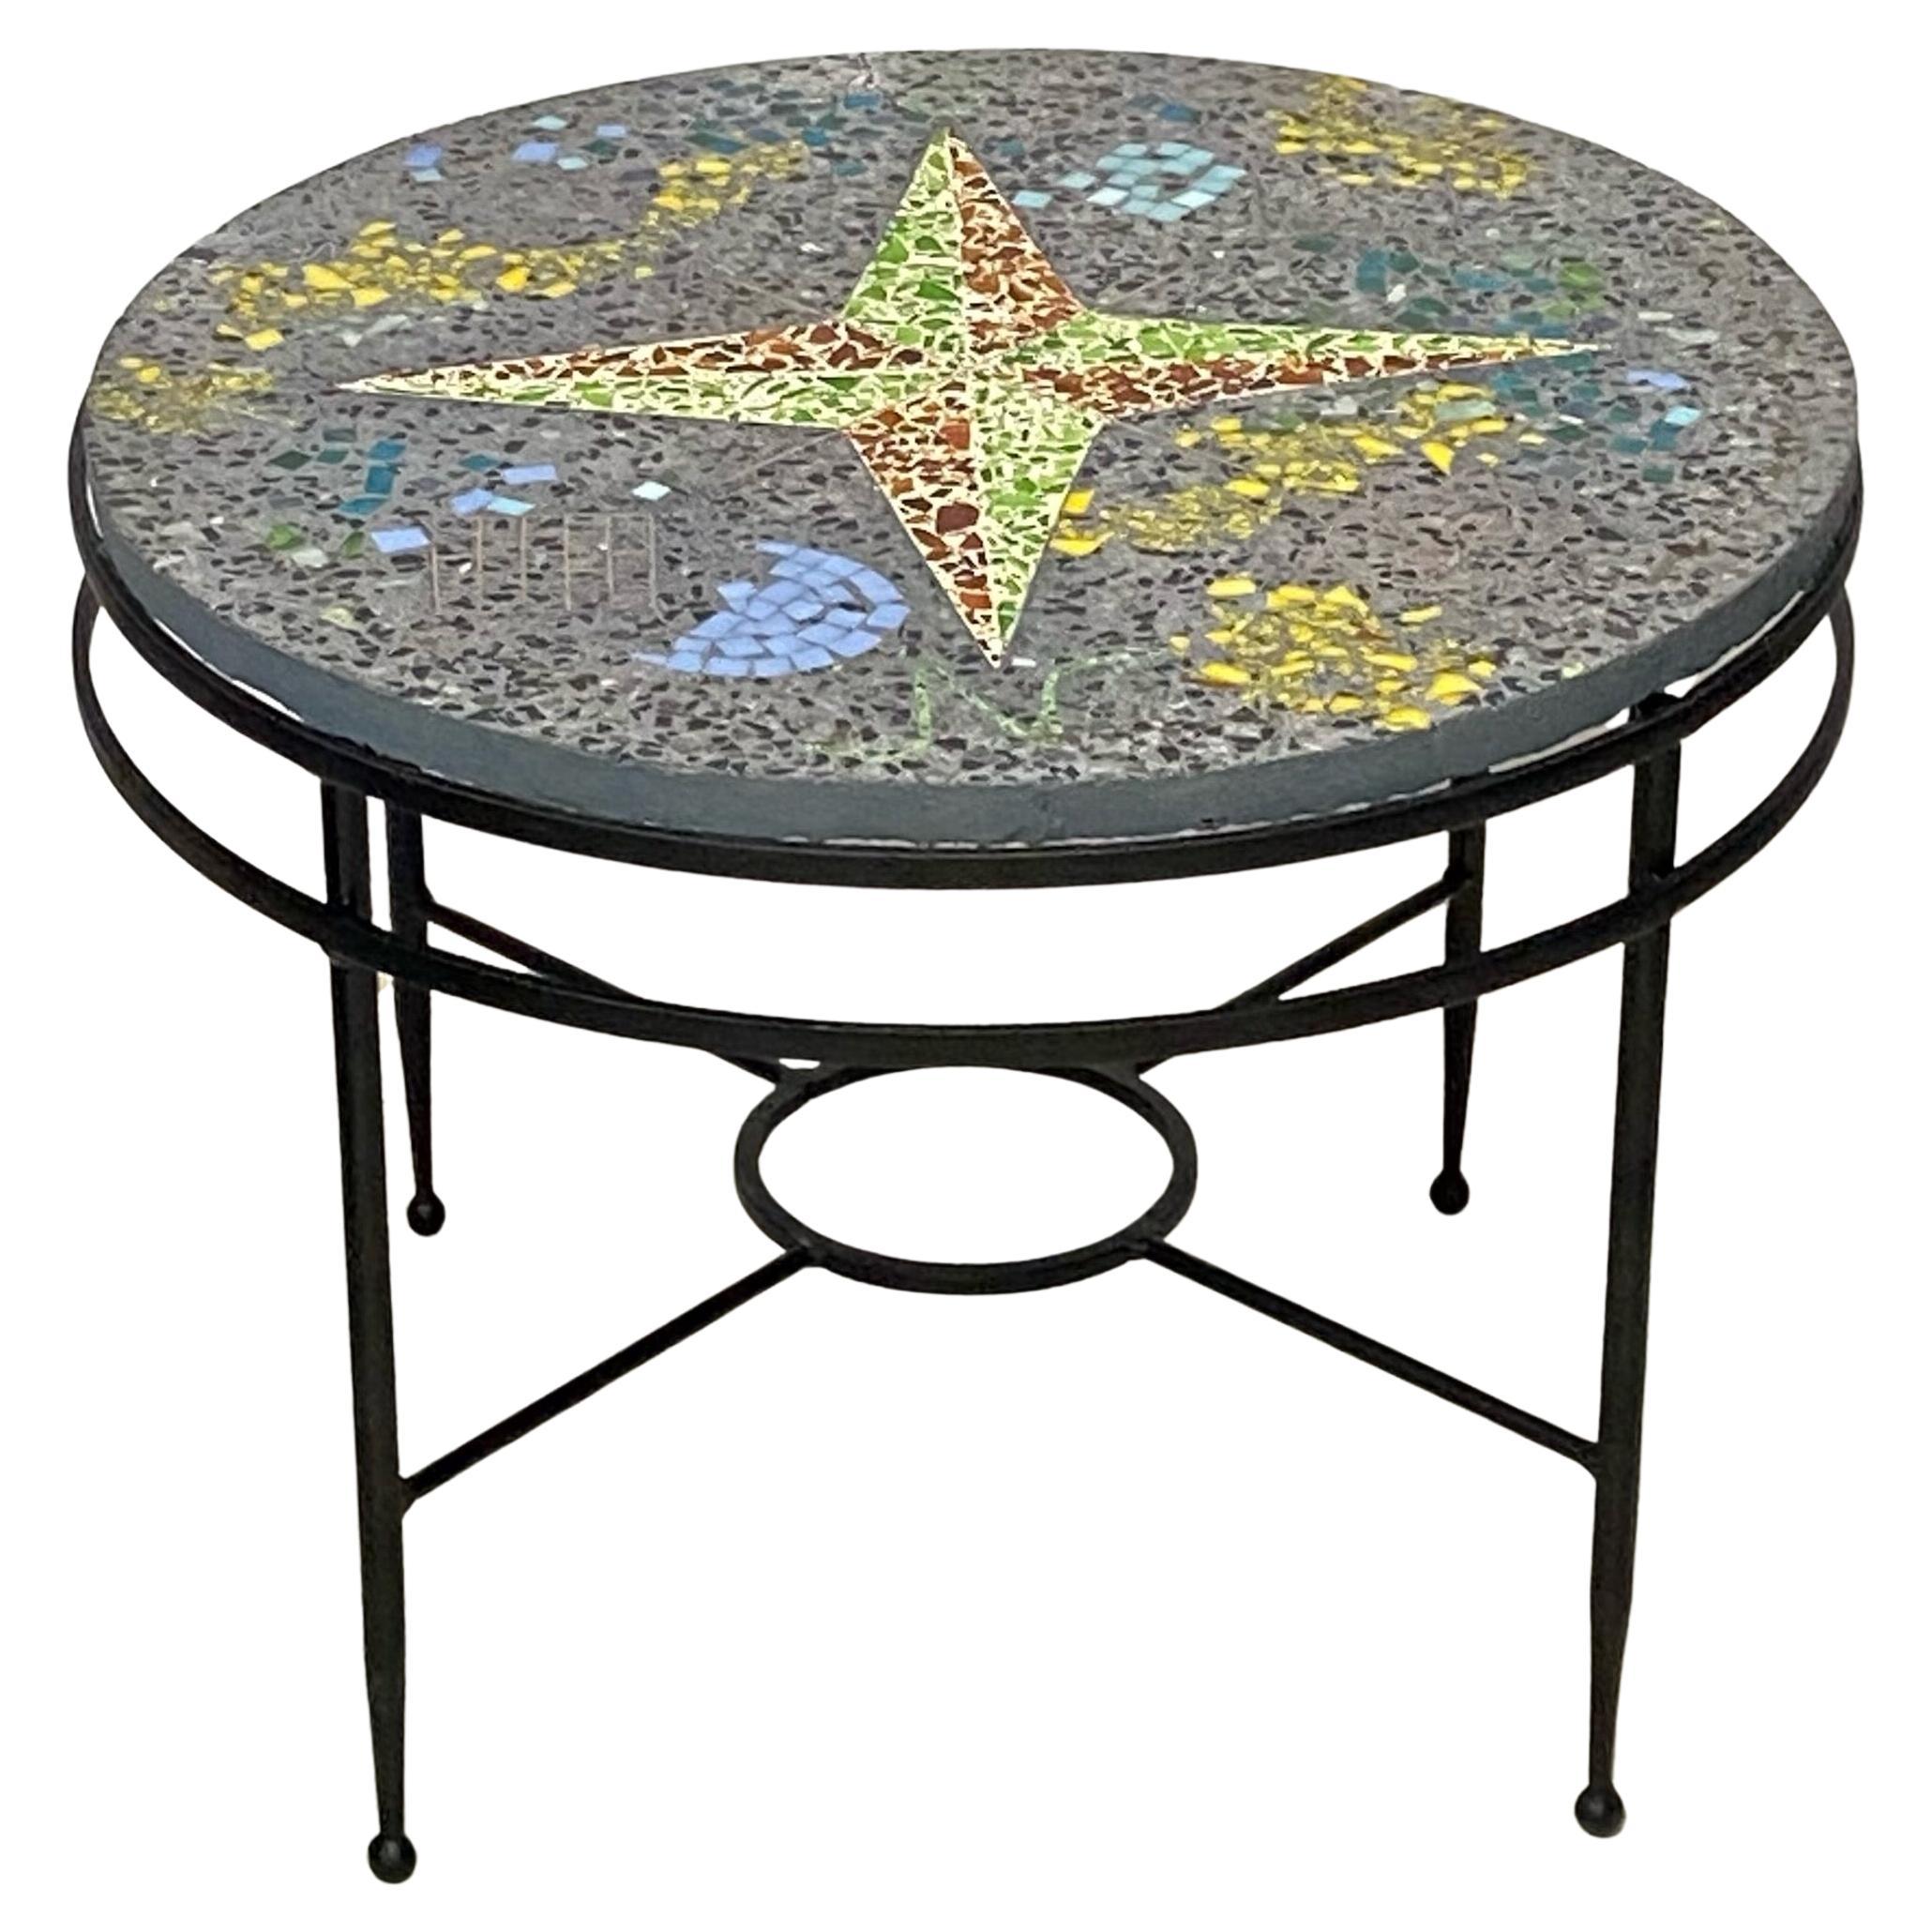 Outstanding Mid-Century Round Terrazzo Mosaic Side / Patio Table